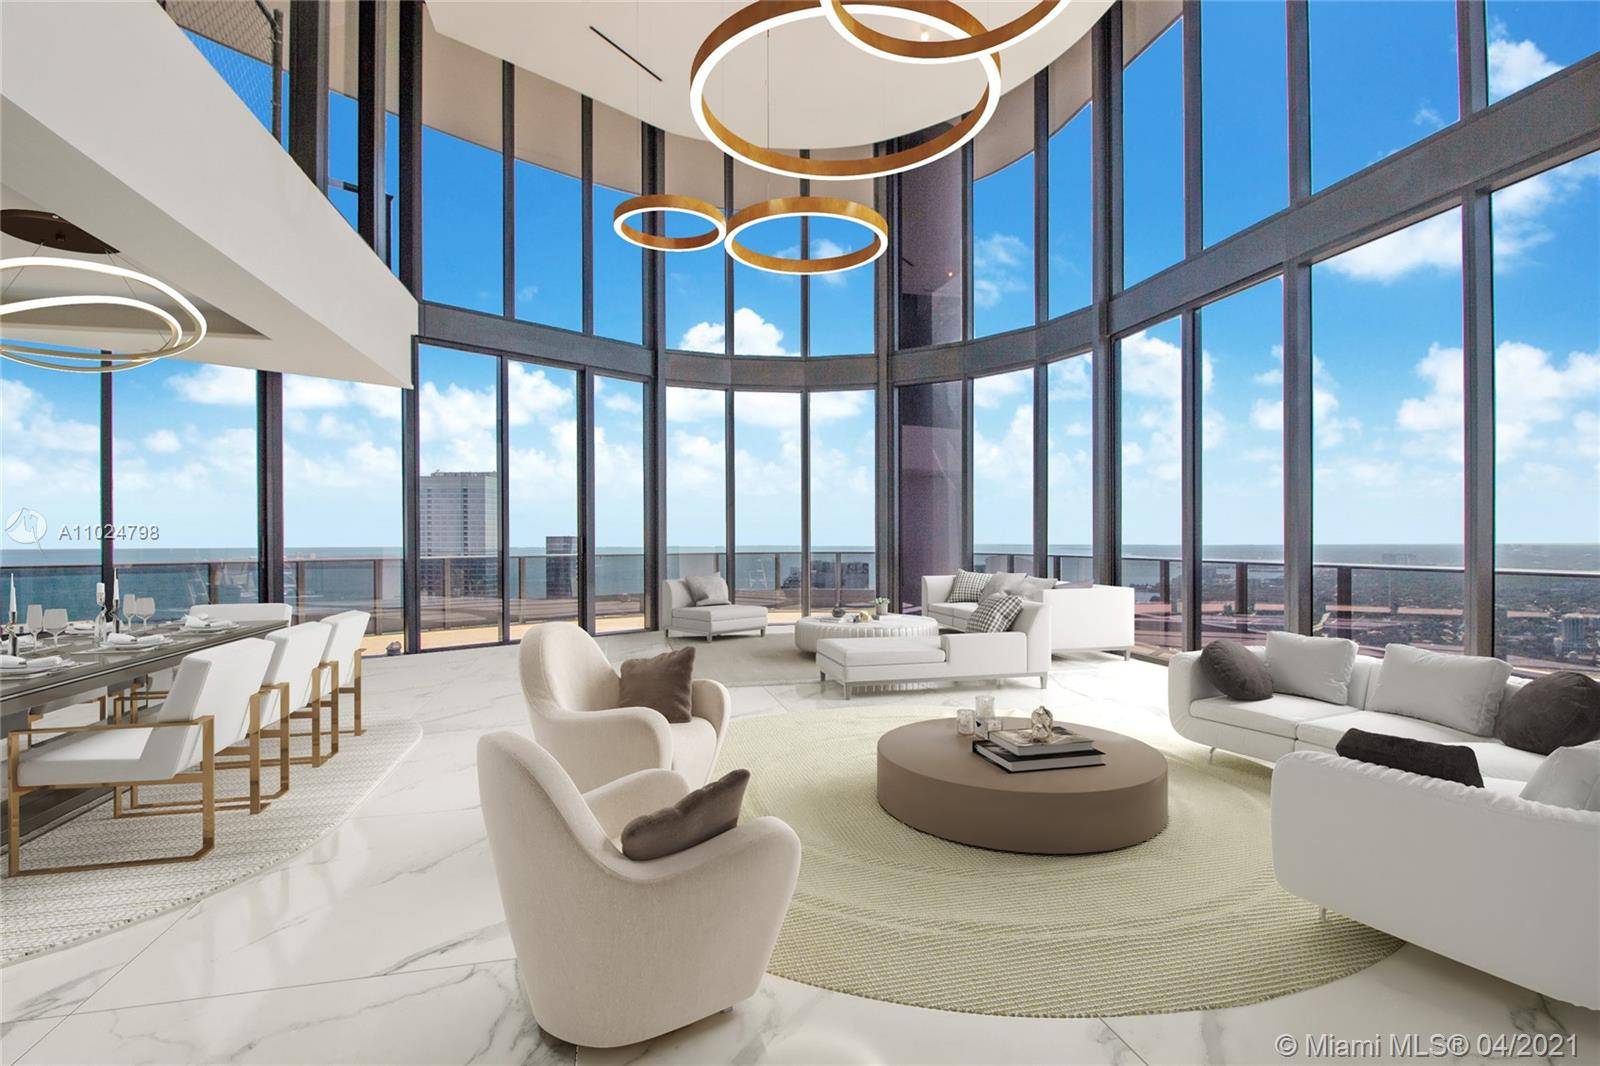 This ultra luxe penthouse will sell at Luxury AUCTION WITHOUT RESERVE on Jan 21 !